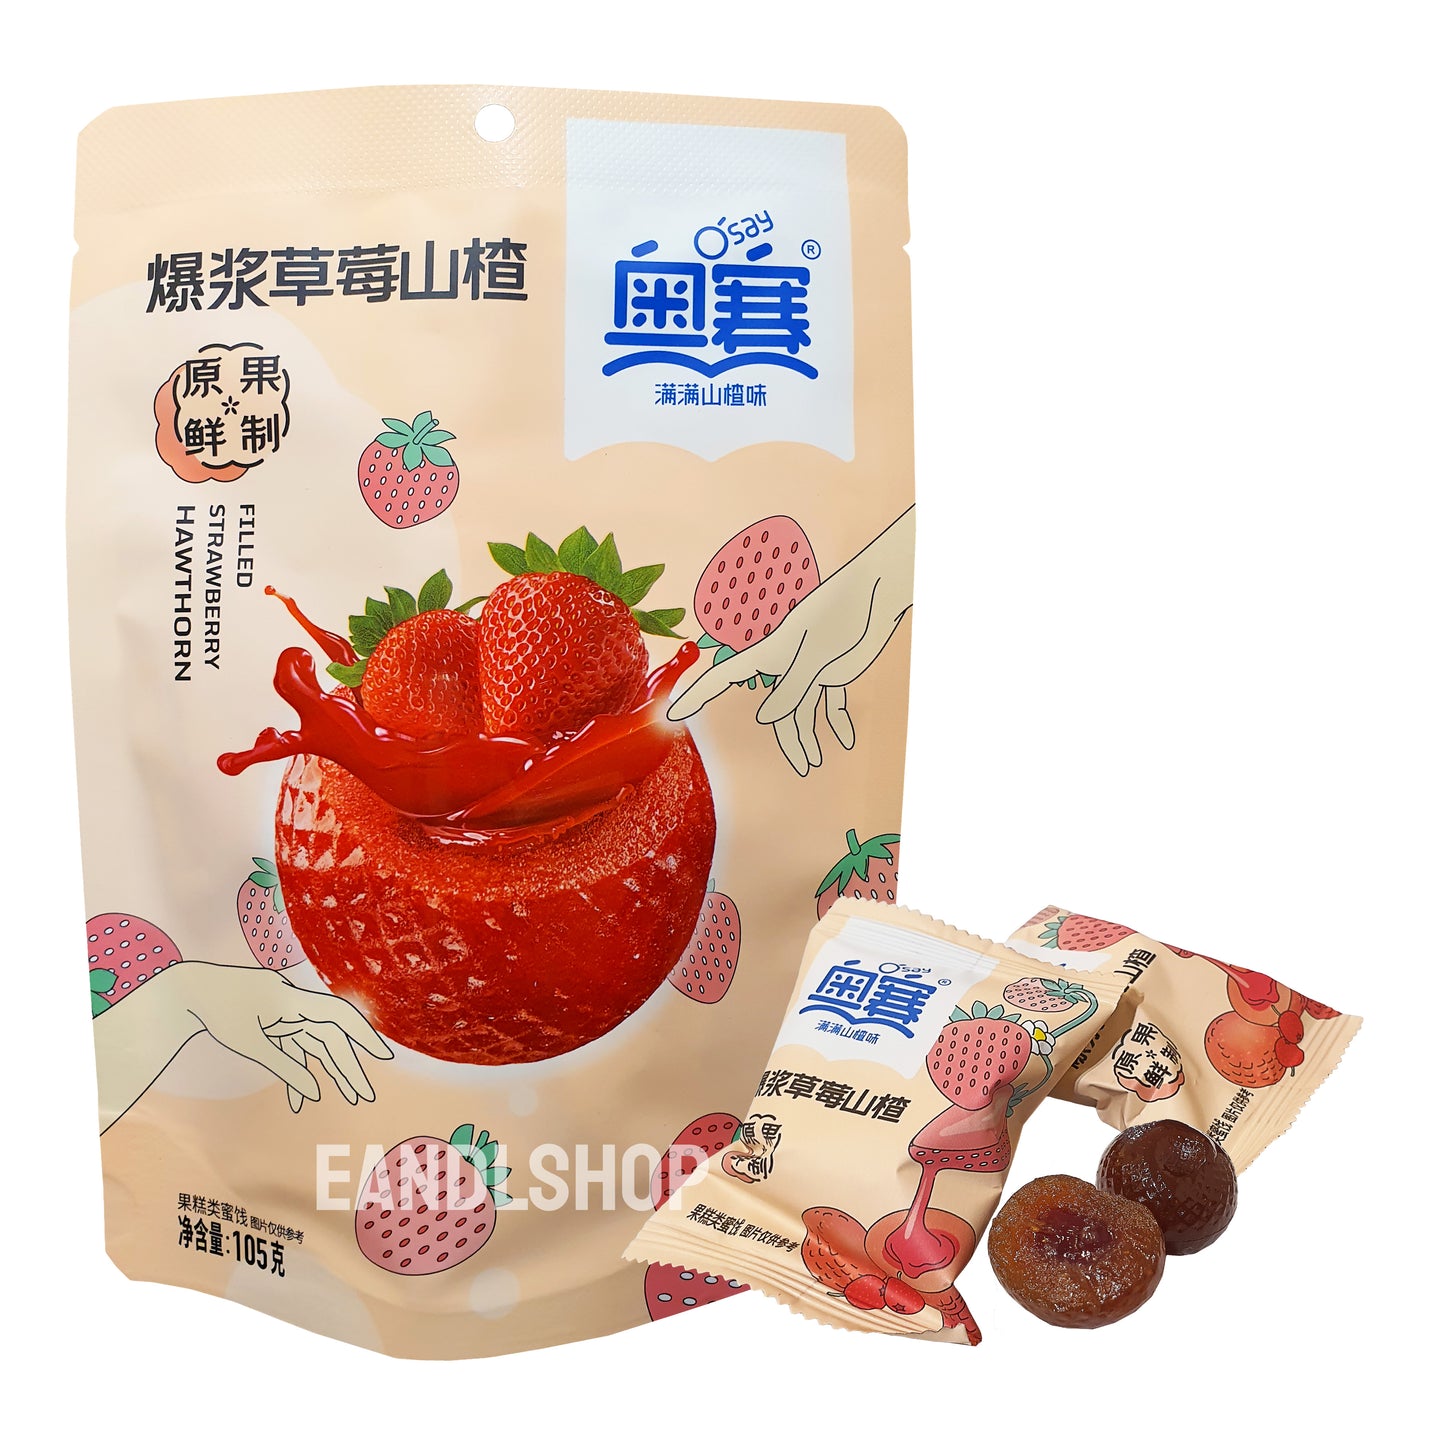 Filled Hawthorn Strawberry. Old-school biscuits, modern snacks (chips, crackers), cakes, gummies, plums, dried fruits, nuts, herbal tea – available at www.EANDLSHOP.com